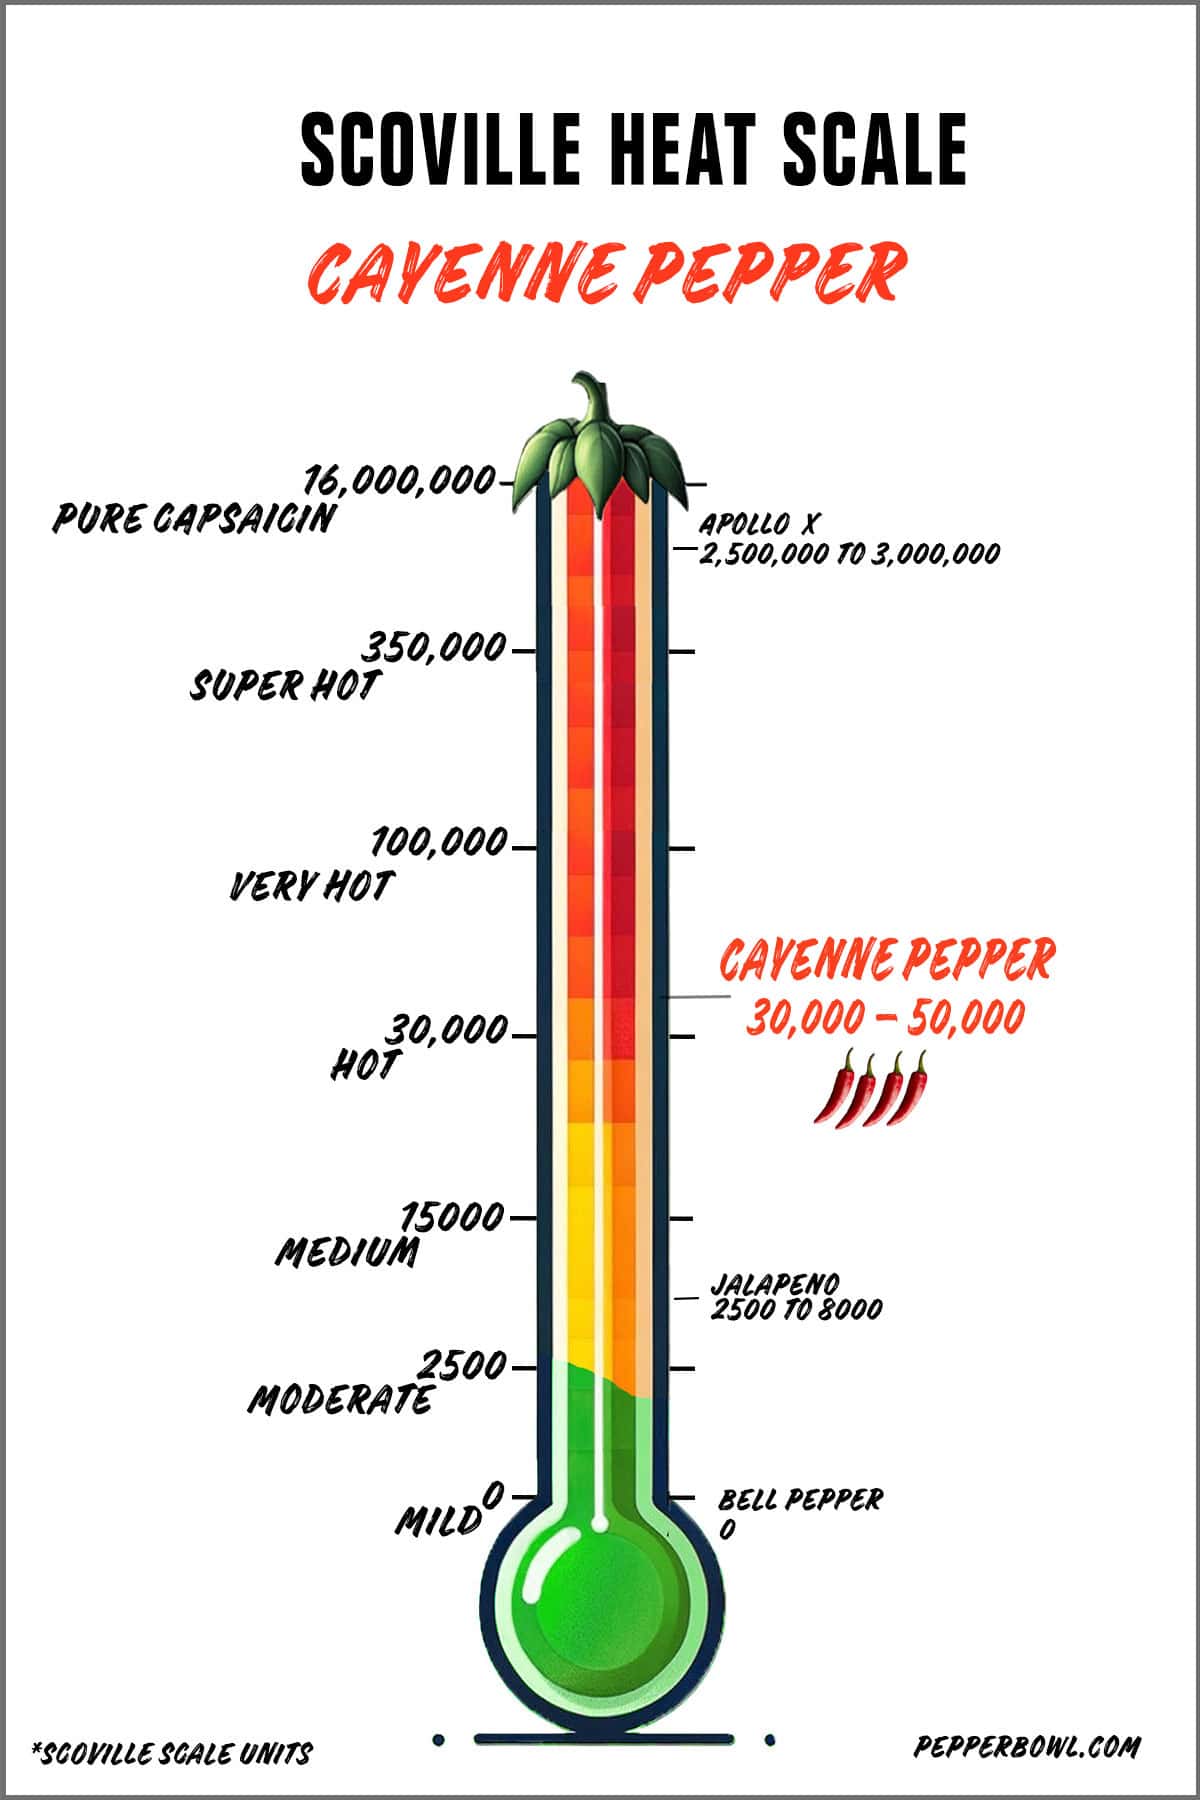 Illustration of the cayenne pepper in the Scoville scale, representing its hot heat intensity.